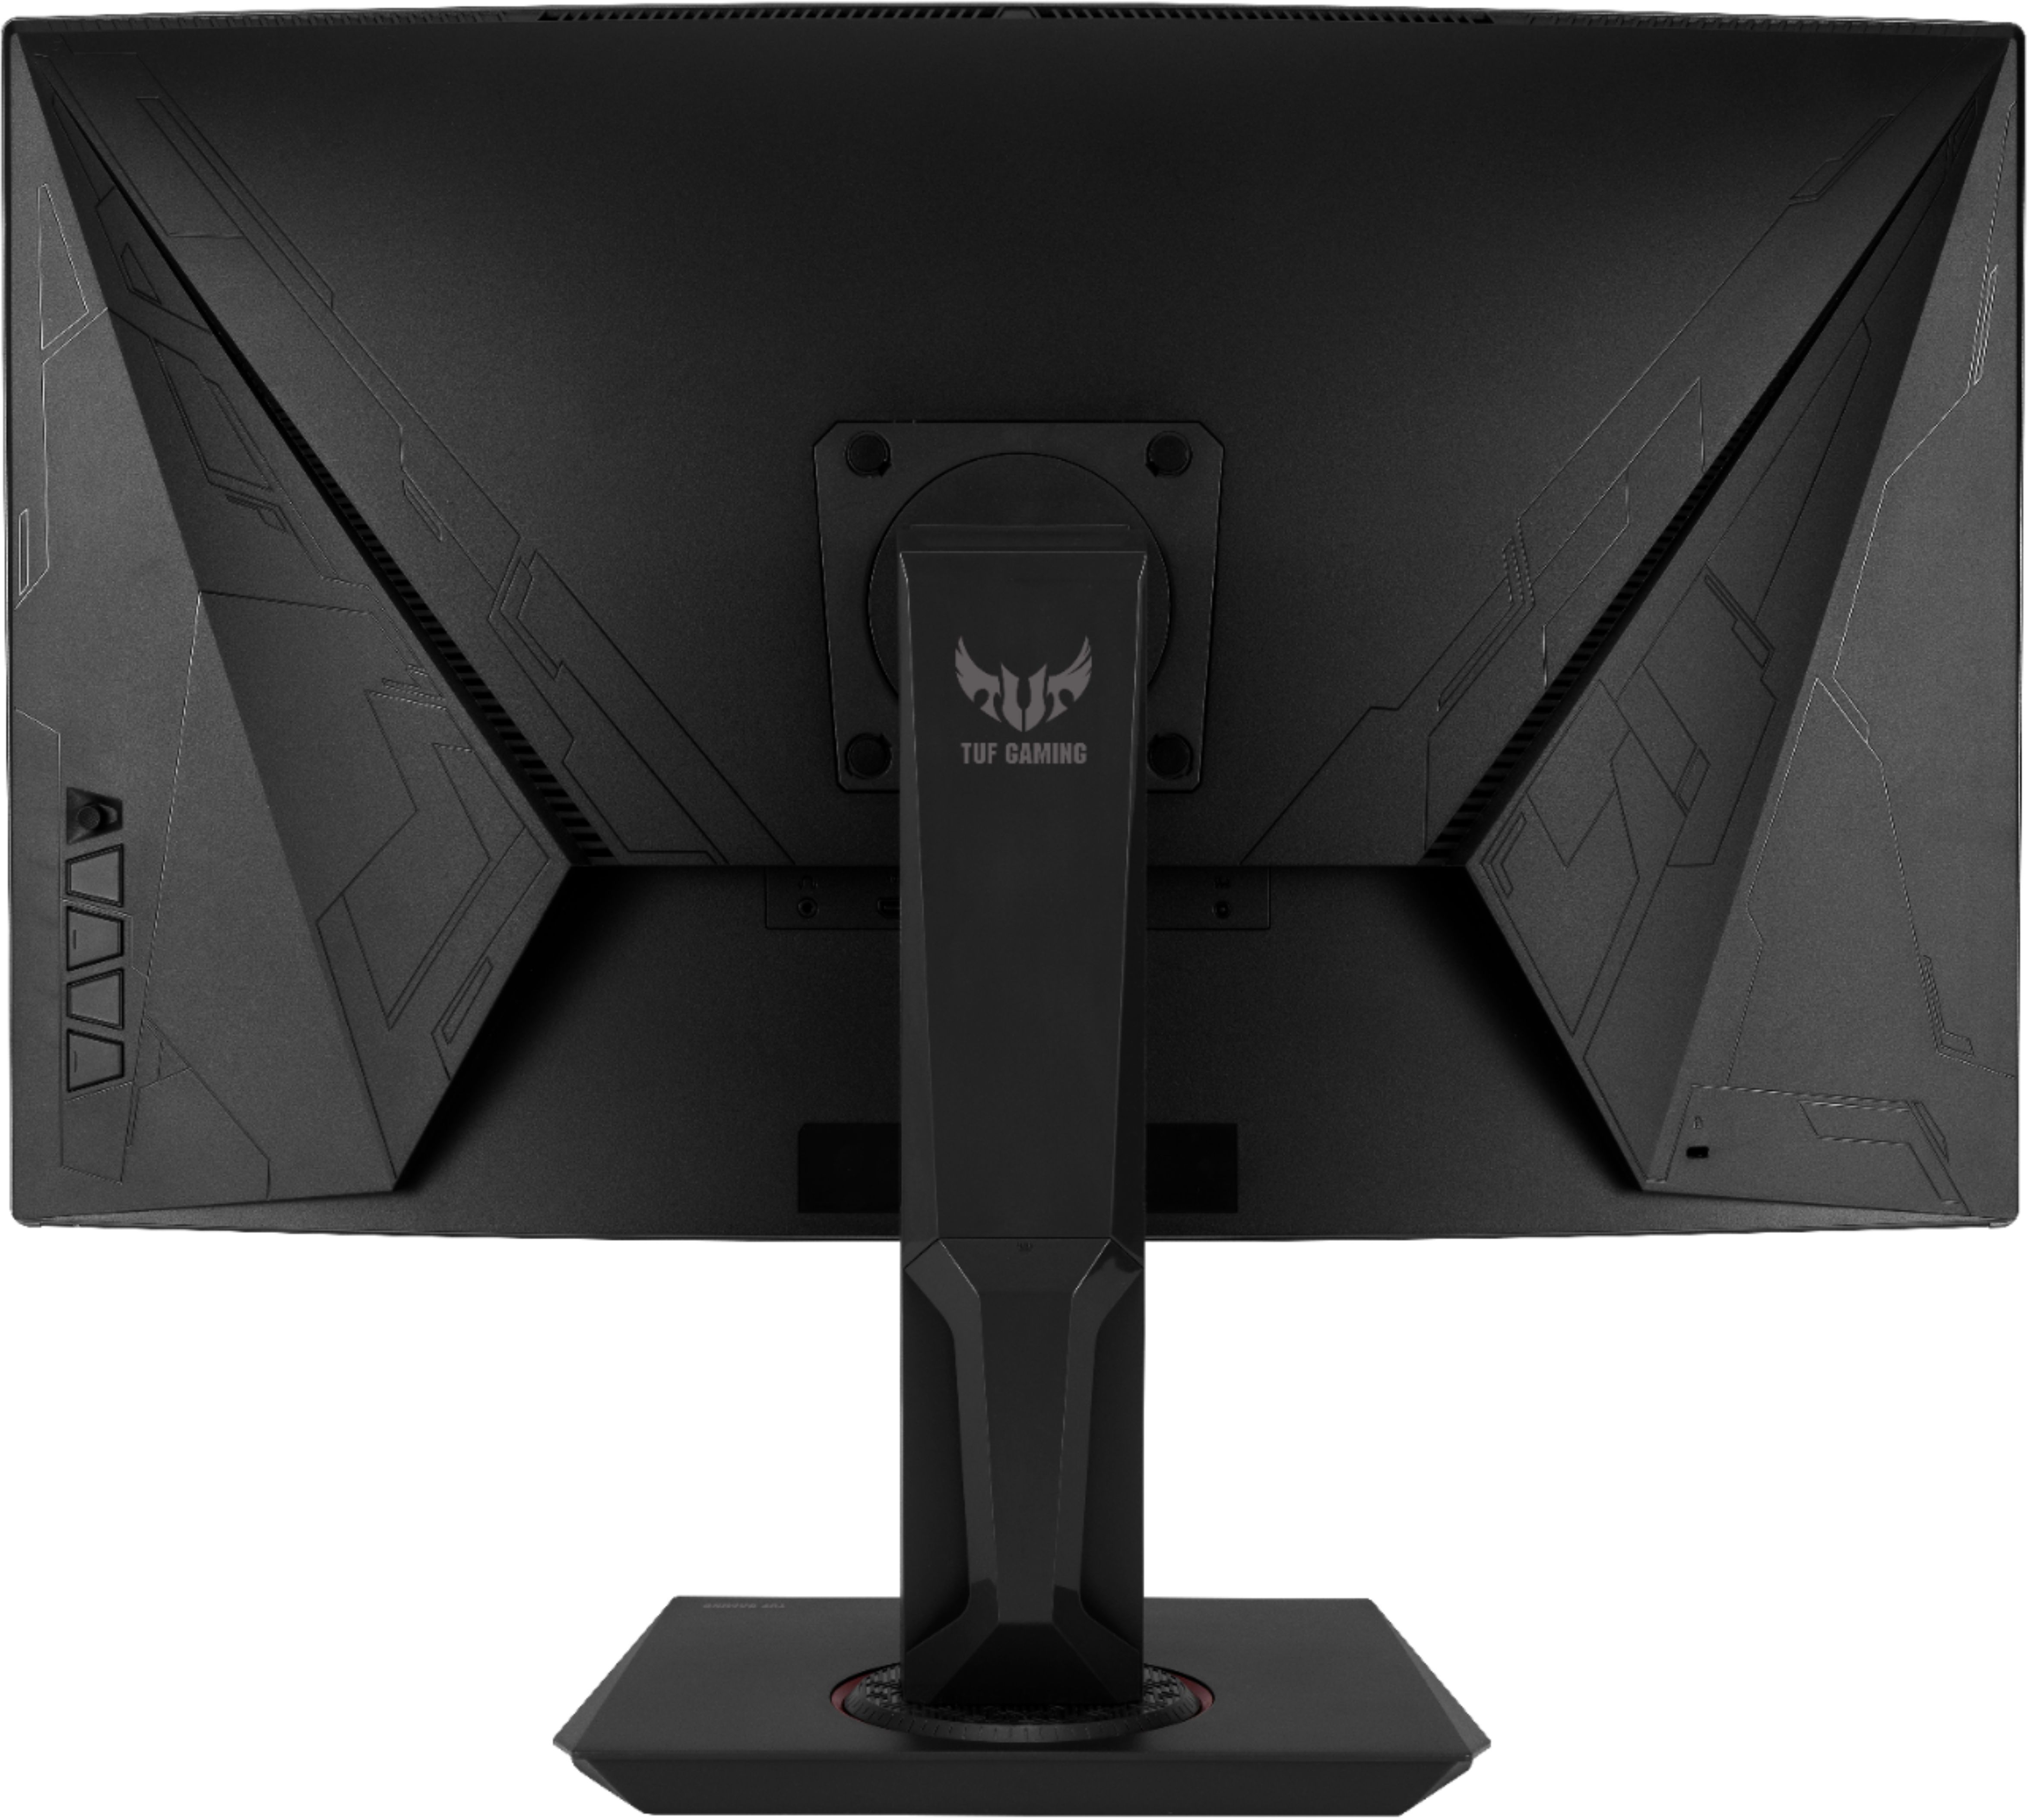 Back View: ASUS - Geek Squad Certified Refurbished TUF Gaming 31.5" LED QHD FreeSync Monitor with HDR (DisplayPort, HDMI)